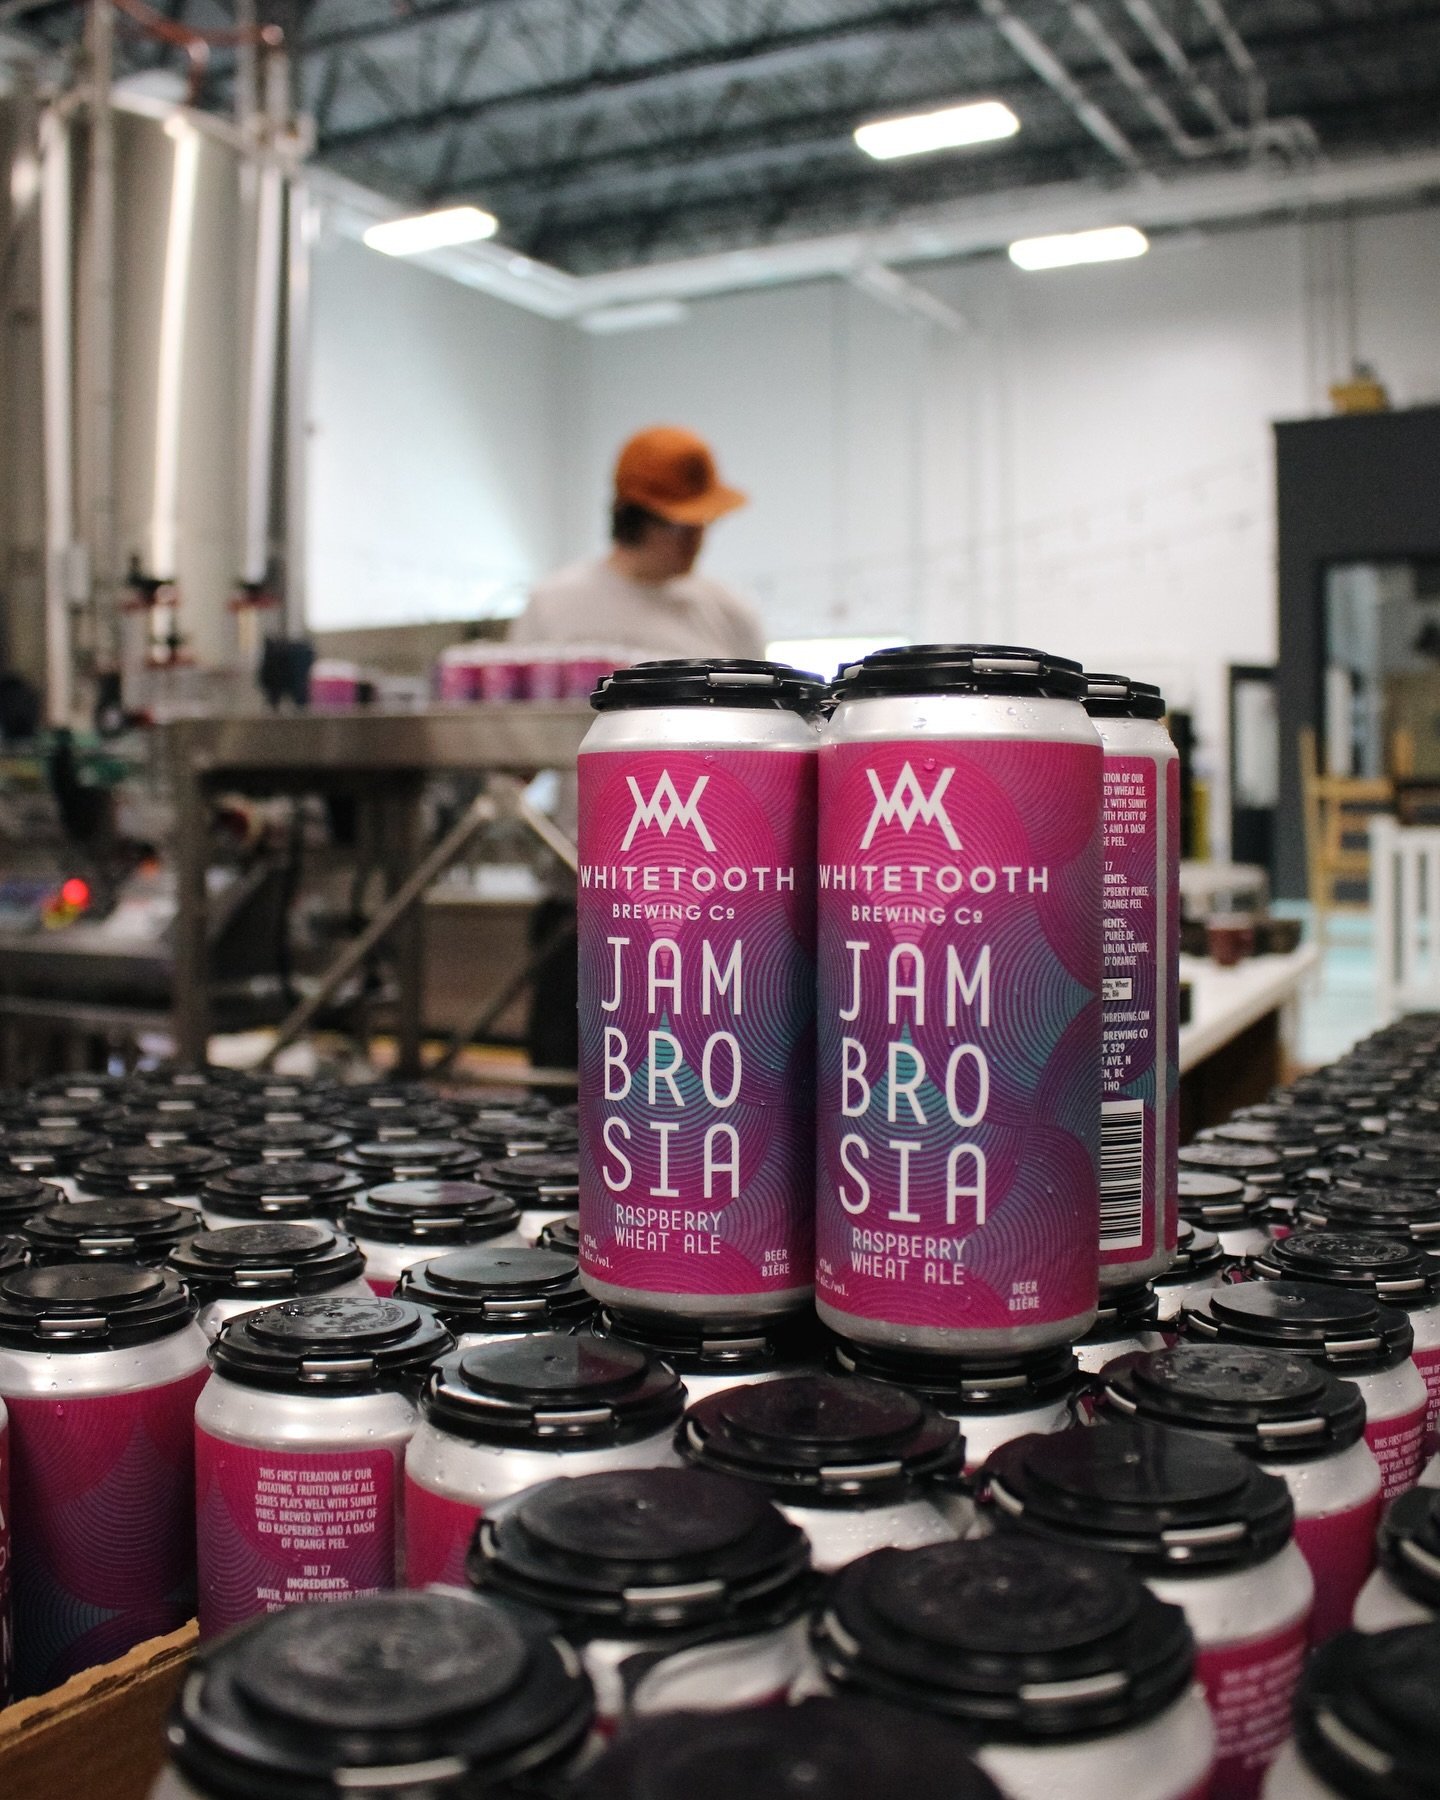 MARK YOUR CALENDARS! 🗓️ 

Jambrosia Raspberry Wheat Ale will be back in the Tasting Room on 🩷 Thursday, May 16th 🩷 at 12pm  sharp! 

Stop by for a glass or snag a tallboy 4-pack or two to pair with your May Long Weekend adventures! 

Cheers!
#whit